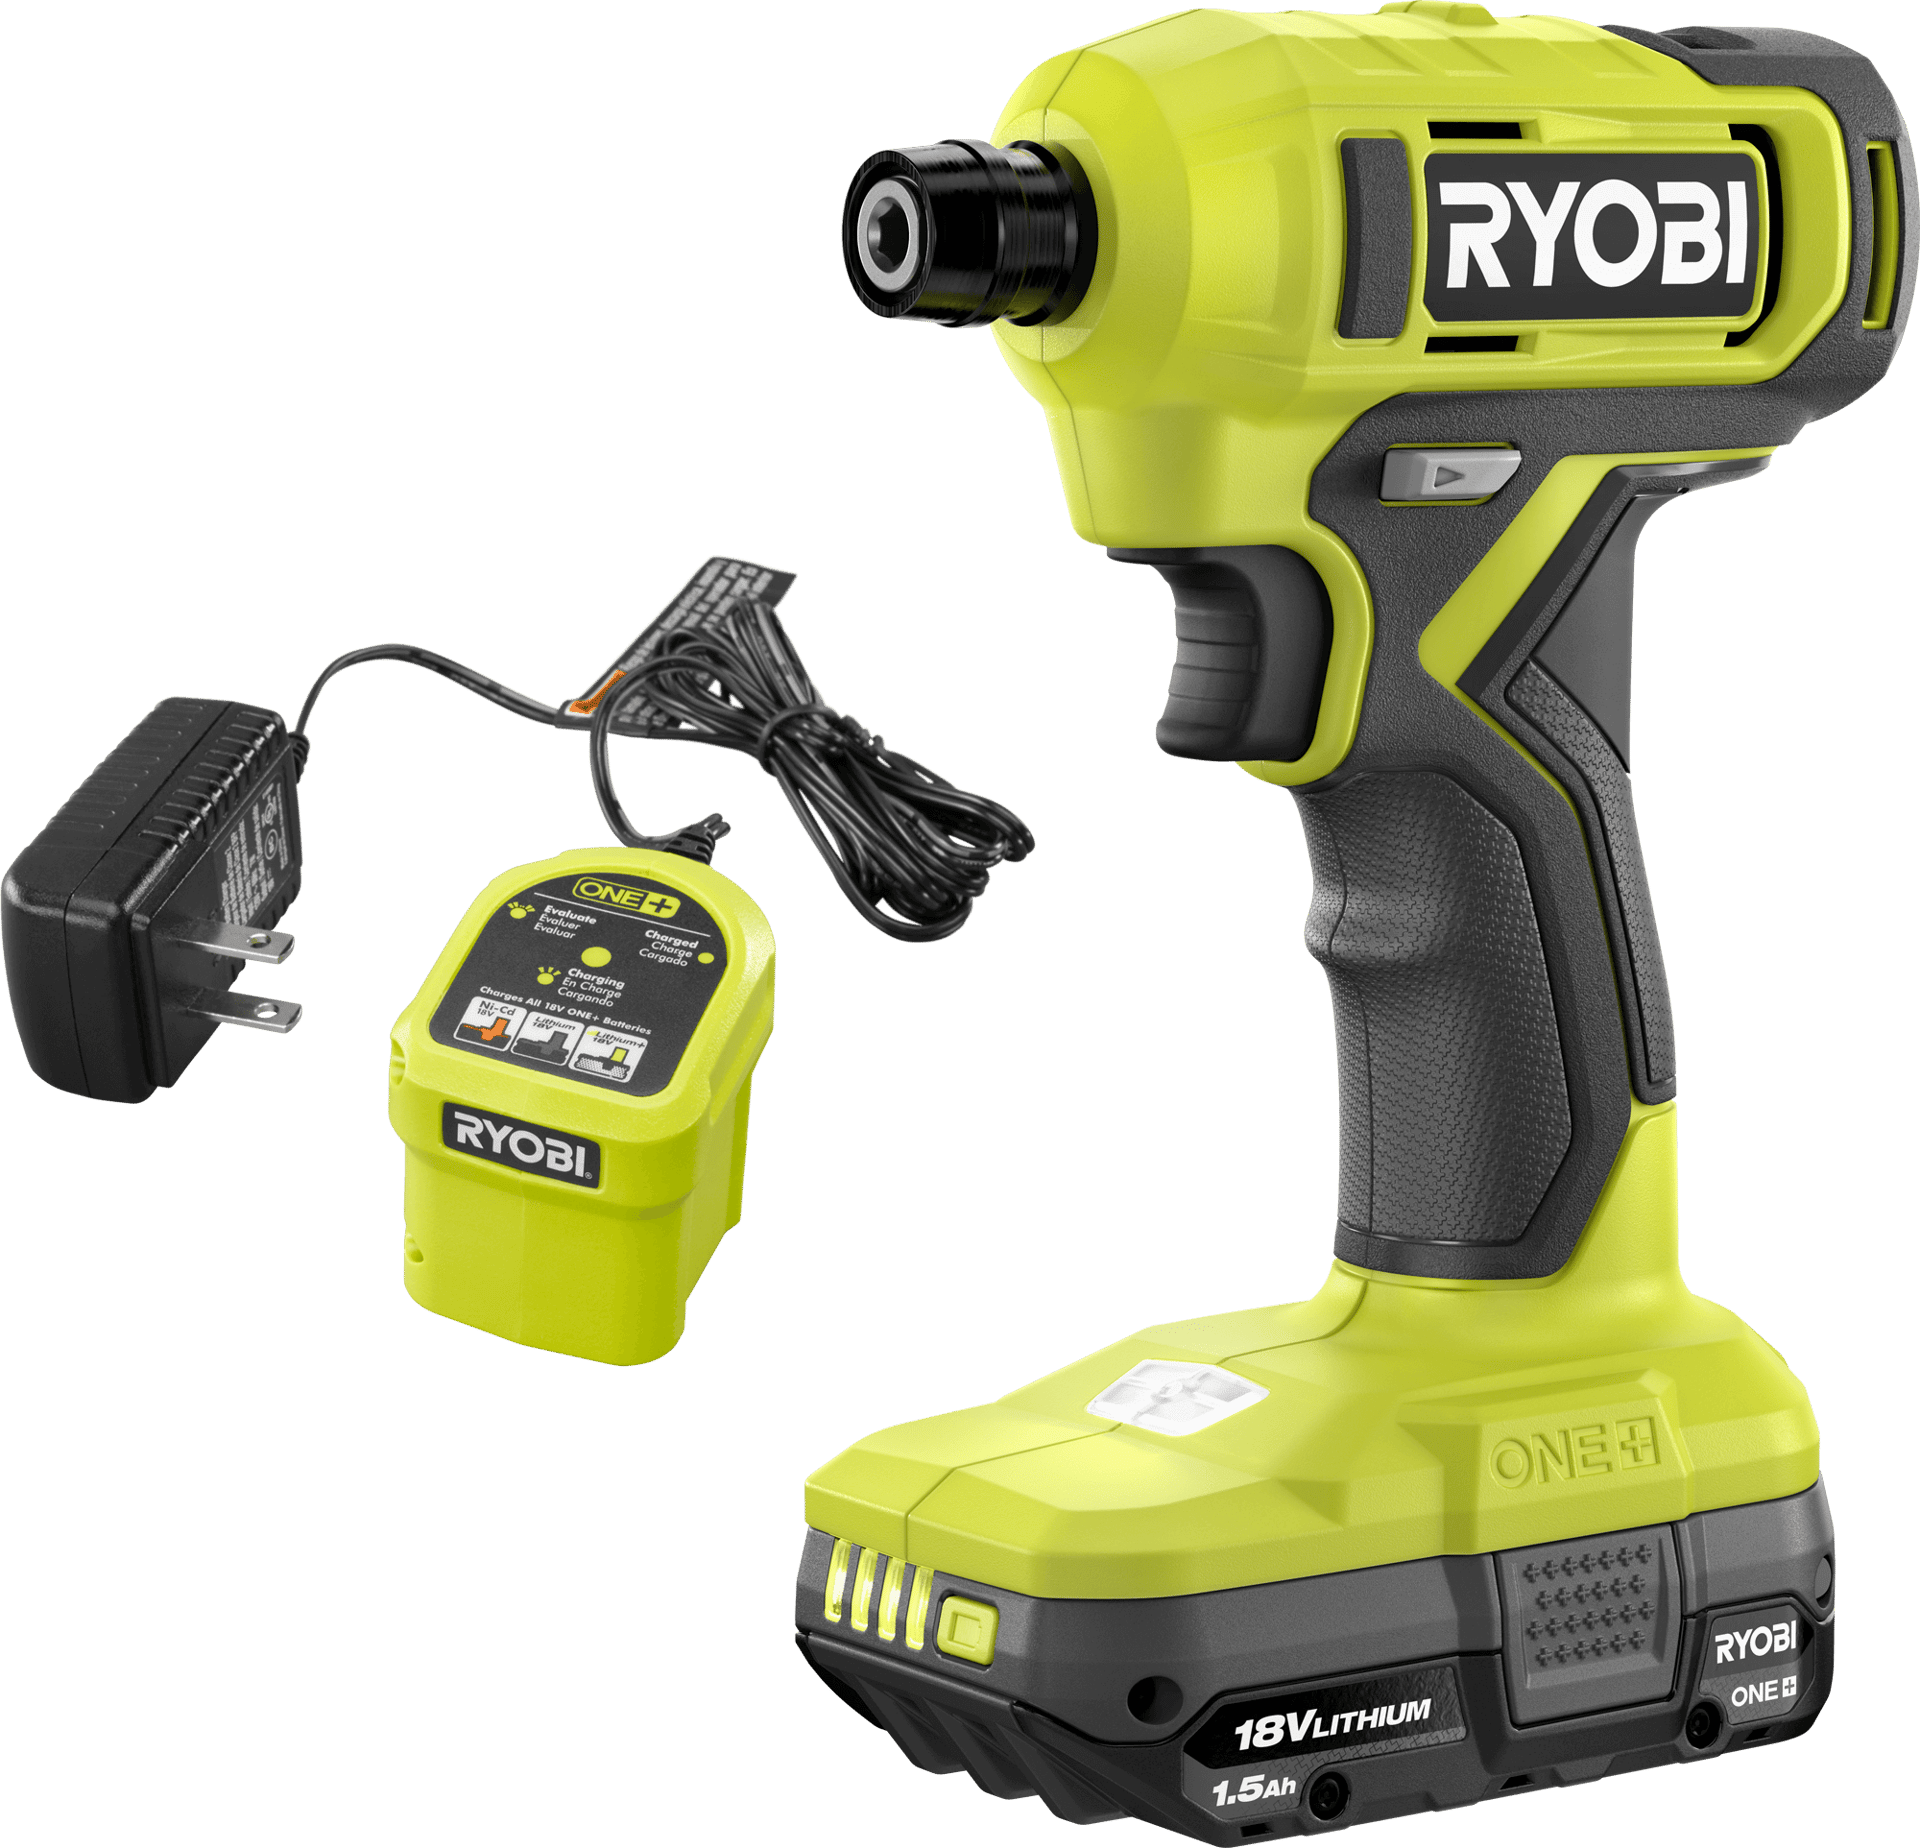 Handheld power drill, Pneumatic tool, Product, Green, Yellow, Font